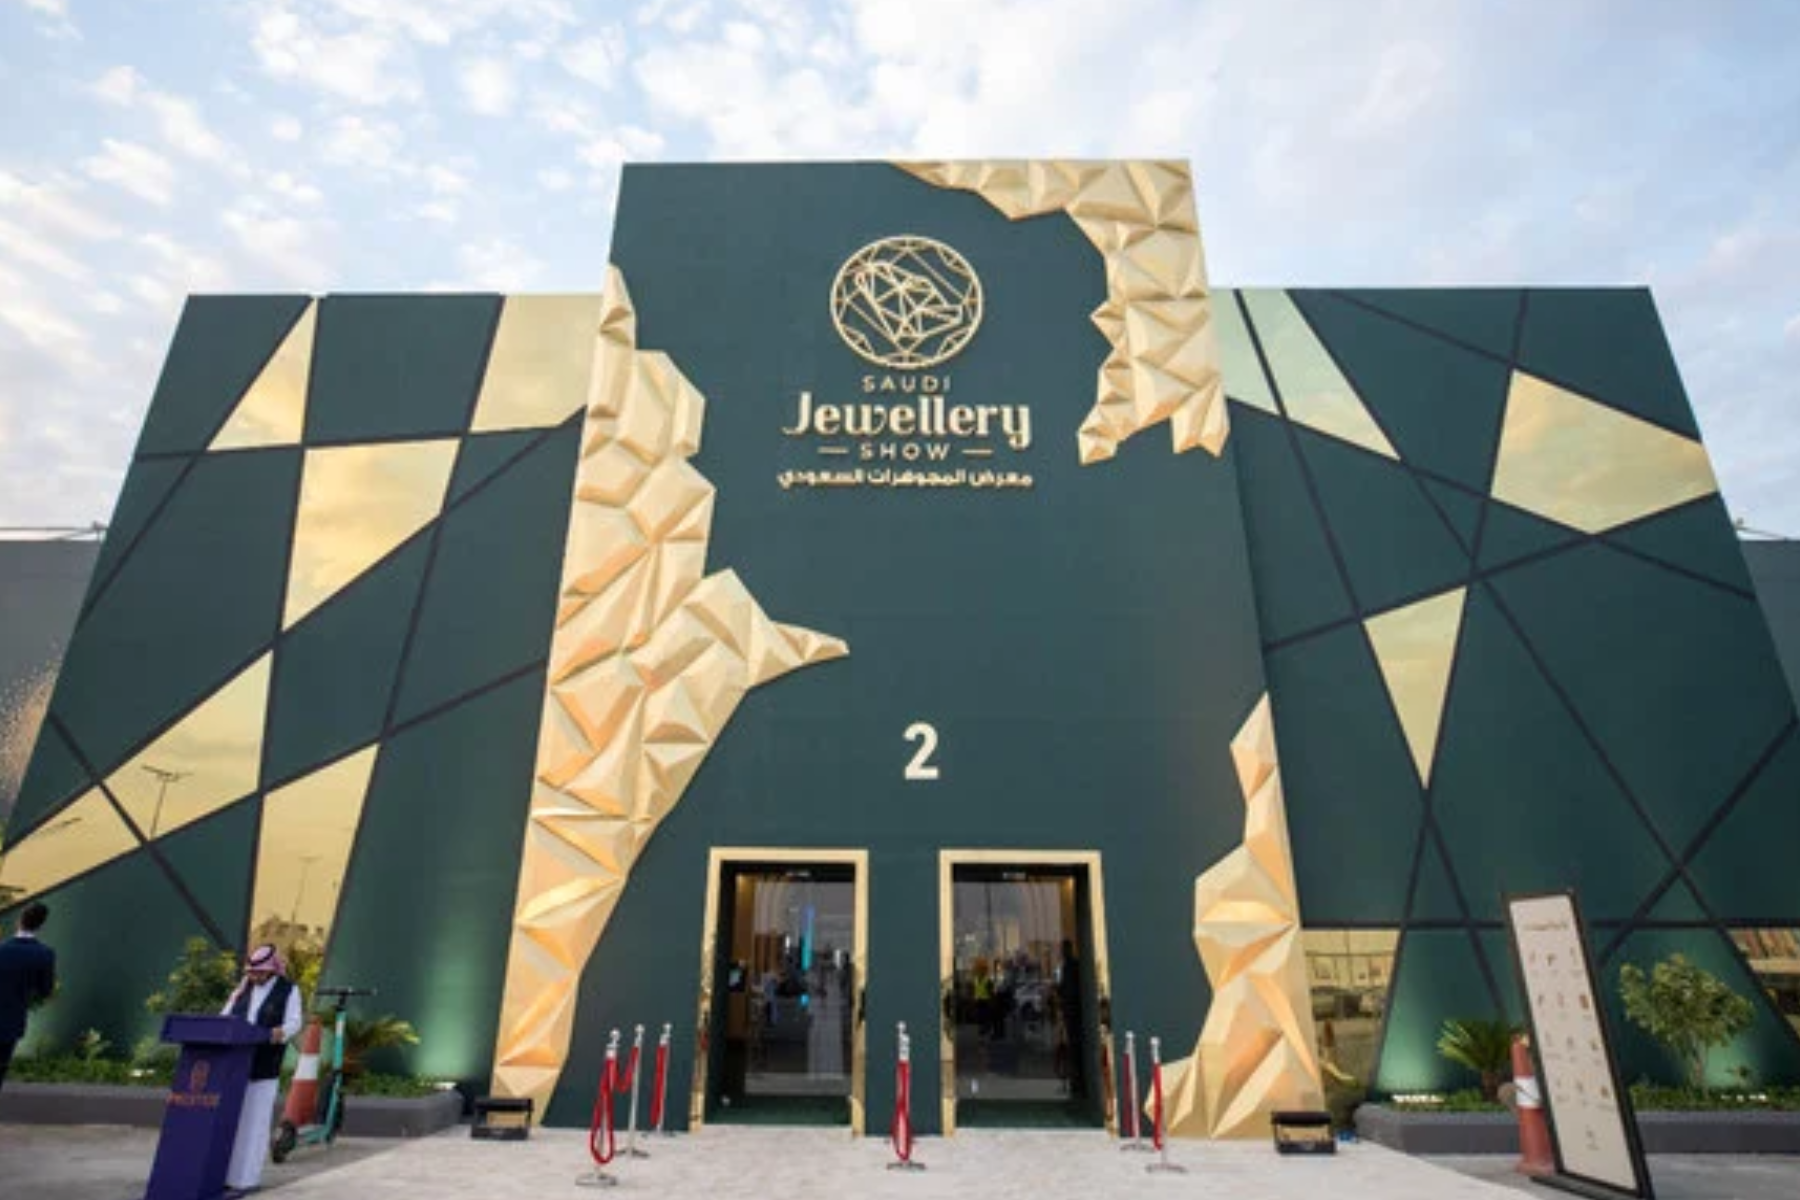 Saudi Jewelry Show Sparkles With $53m Gem Suite, More Than 100 Global Luxury Brands